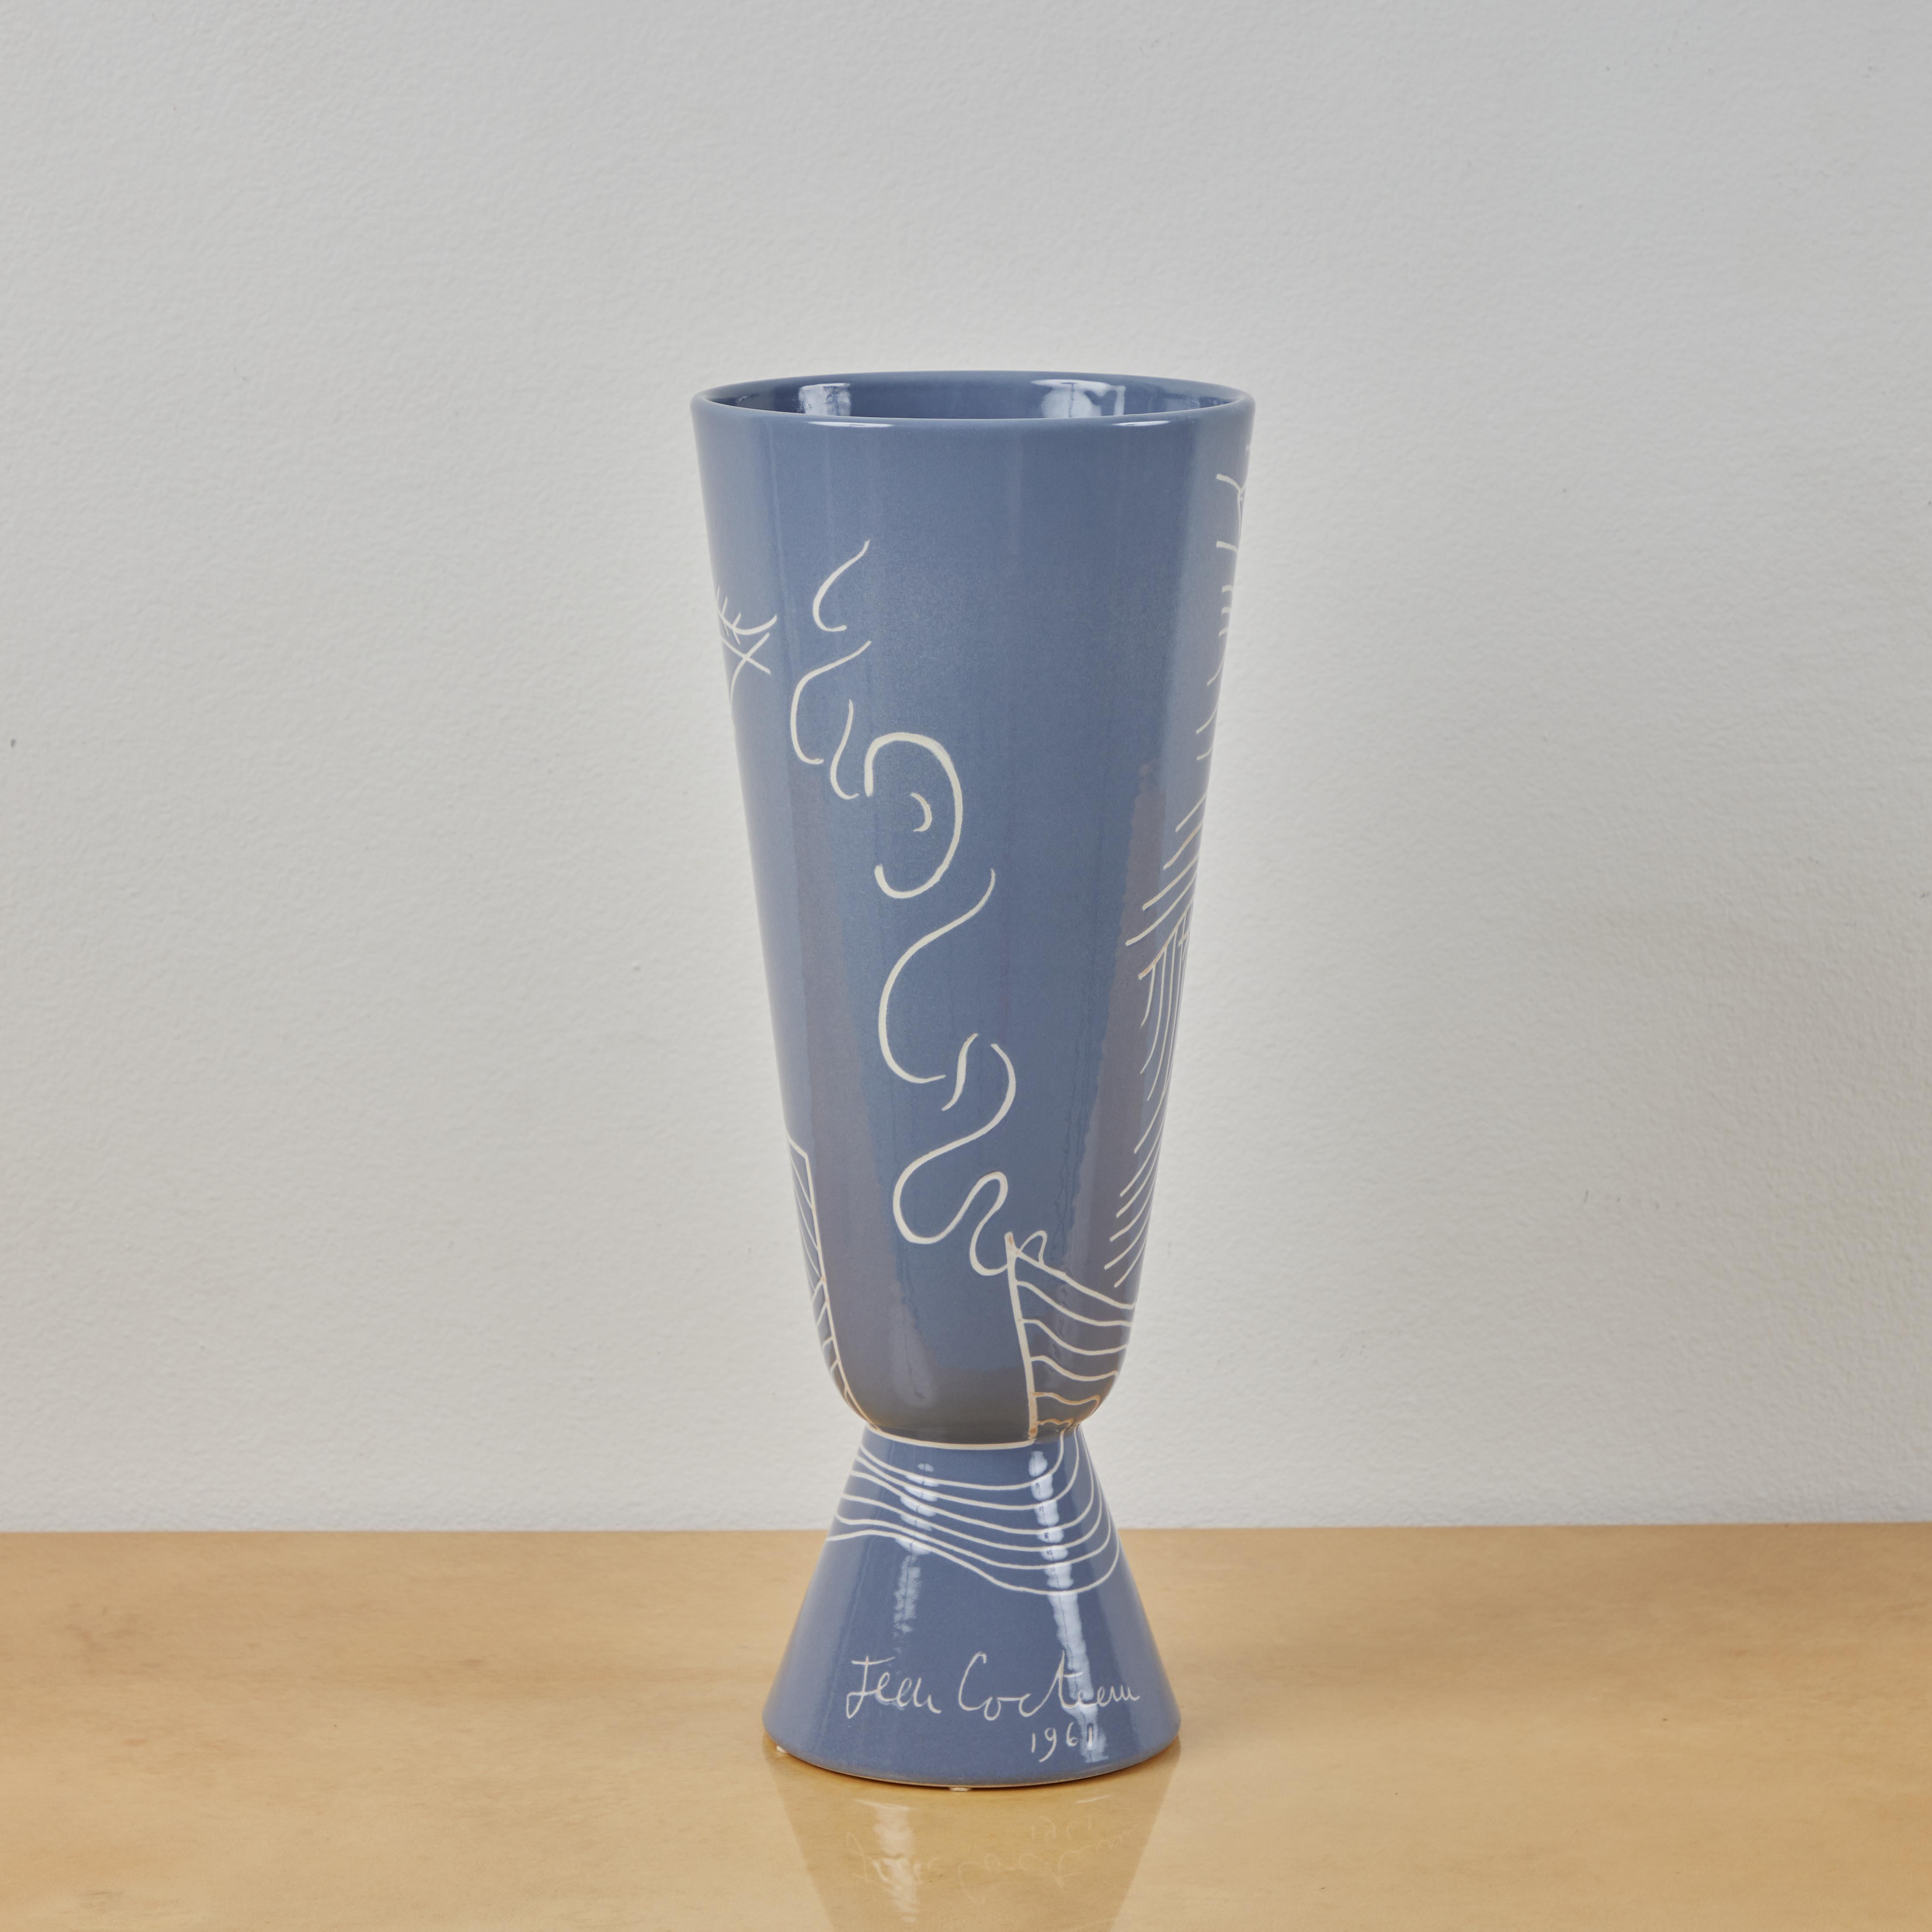 This is a glazed porcelain vase produced by Roche Bobois in the 2010s. The vase utilizes a design Jean Cocteau produced in the early 1960s. its signature design features a profile, fish, and geometric design. From a limited edition of 1,000 produced